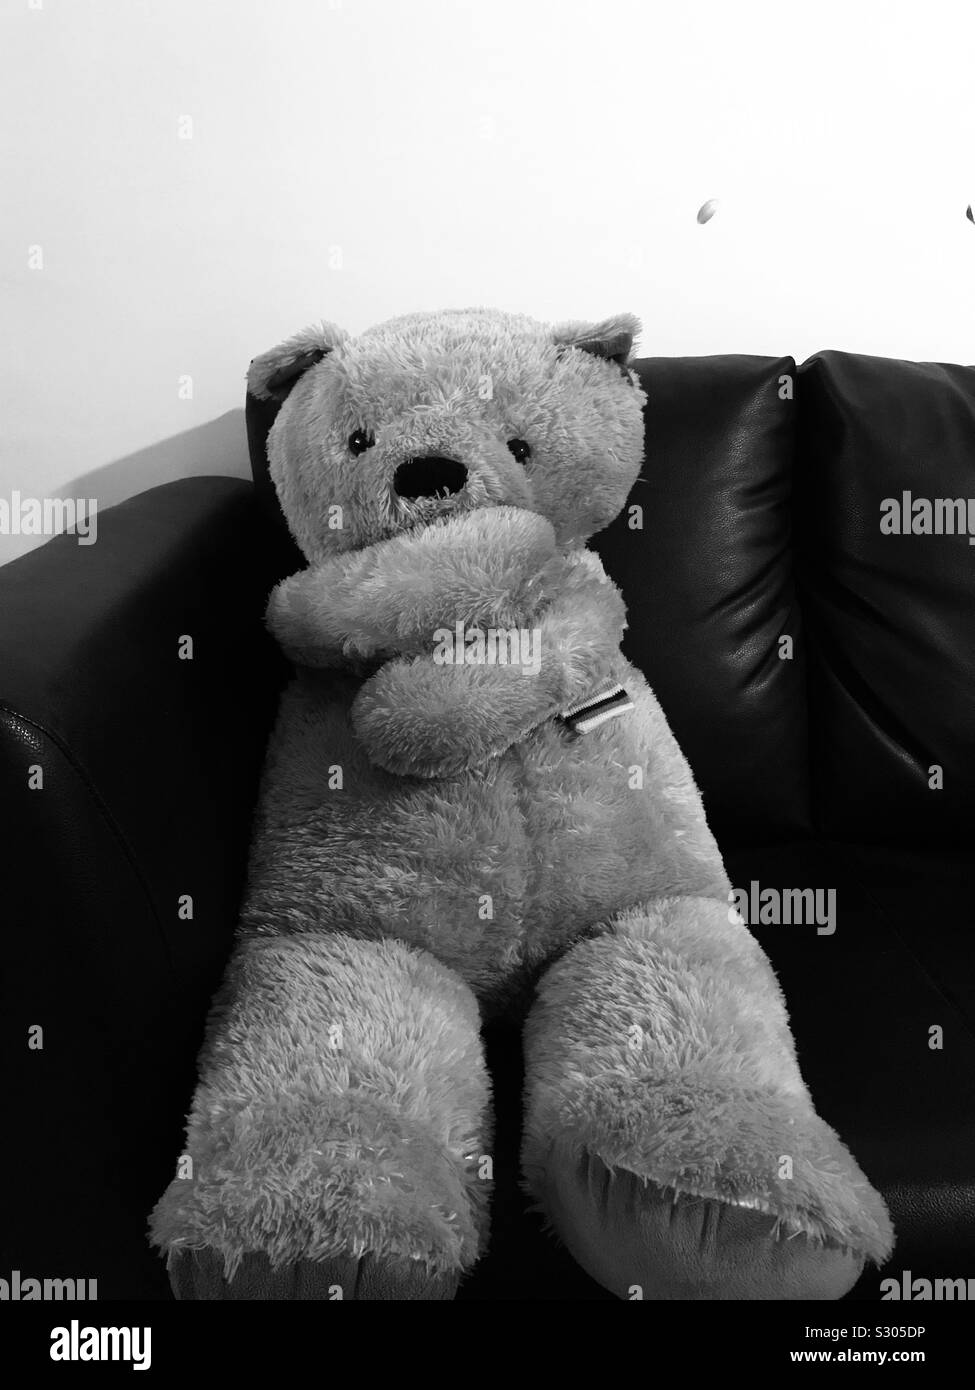 Giant Teddy bear laying on a sofa ,black and white picture-In a minimalist setting Stock Photo